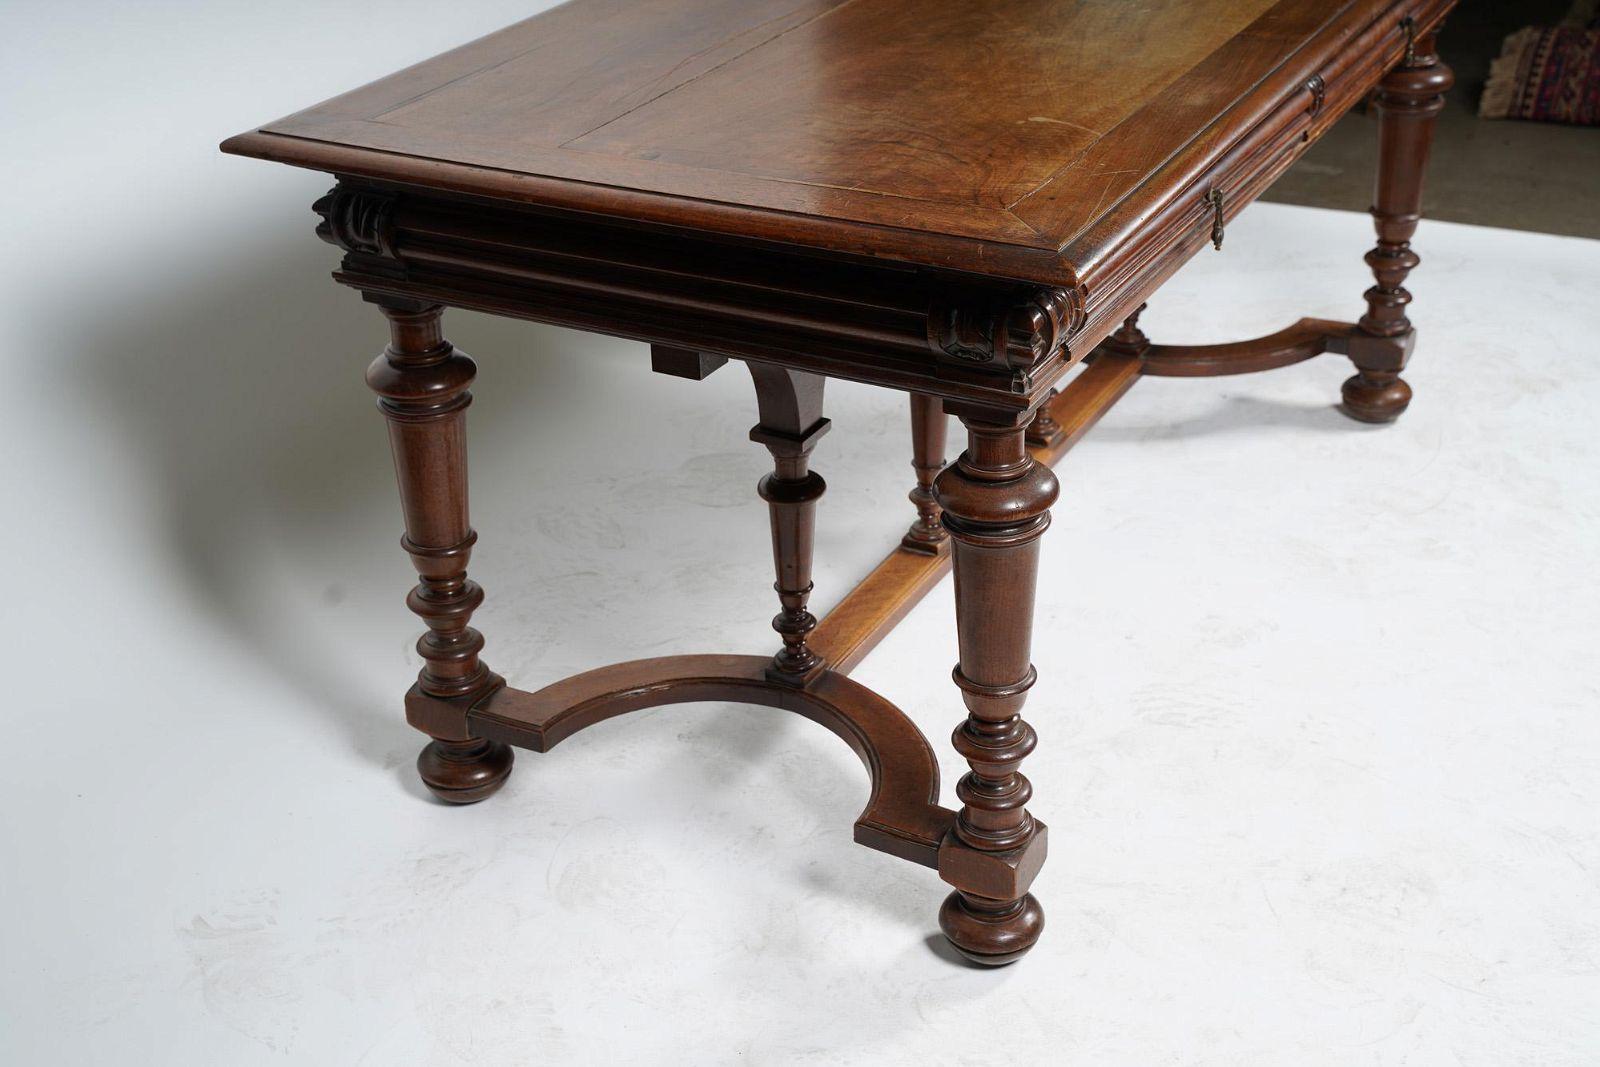 Beautifully maintained Circa 1860 American Victorian Walnut Library Table / Desk in the Renaissance Revival Style. Solid wood construction throughout. Two side by side deep drawers with central locking mechanism. 